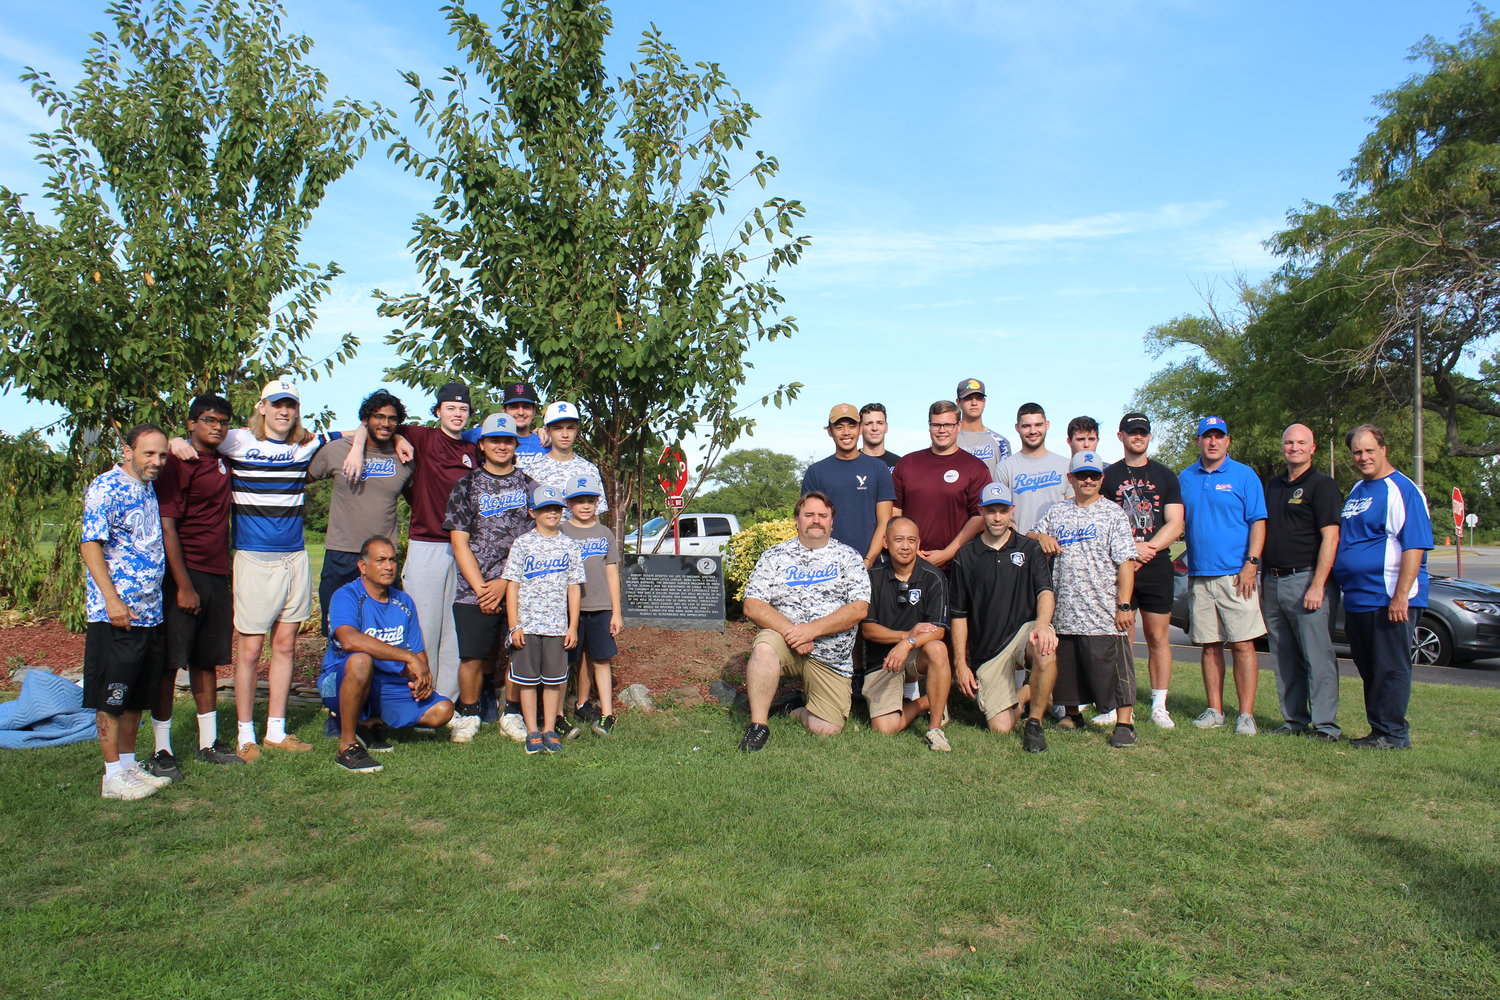 The Baldwin baseball teams gathered with the Oliveri family and Hempstead Town Councilman Christopher Carini in front of Robert Oliveri’s monument, overlooking the baseball field he loved.